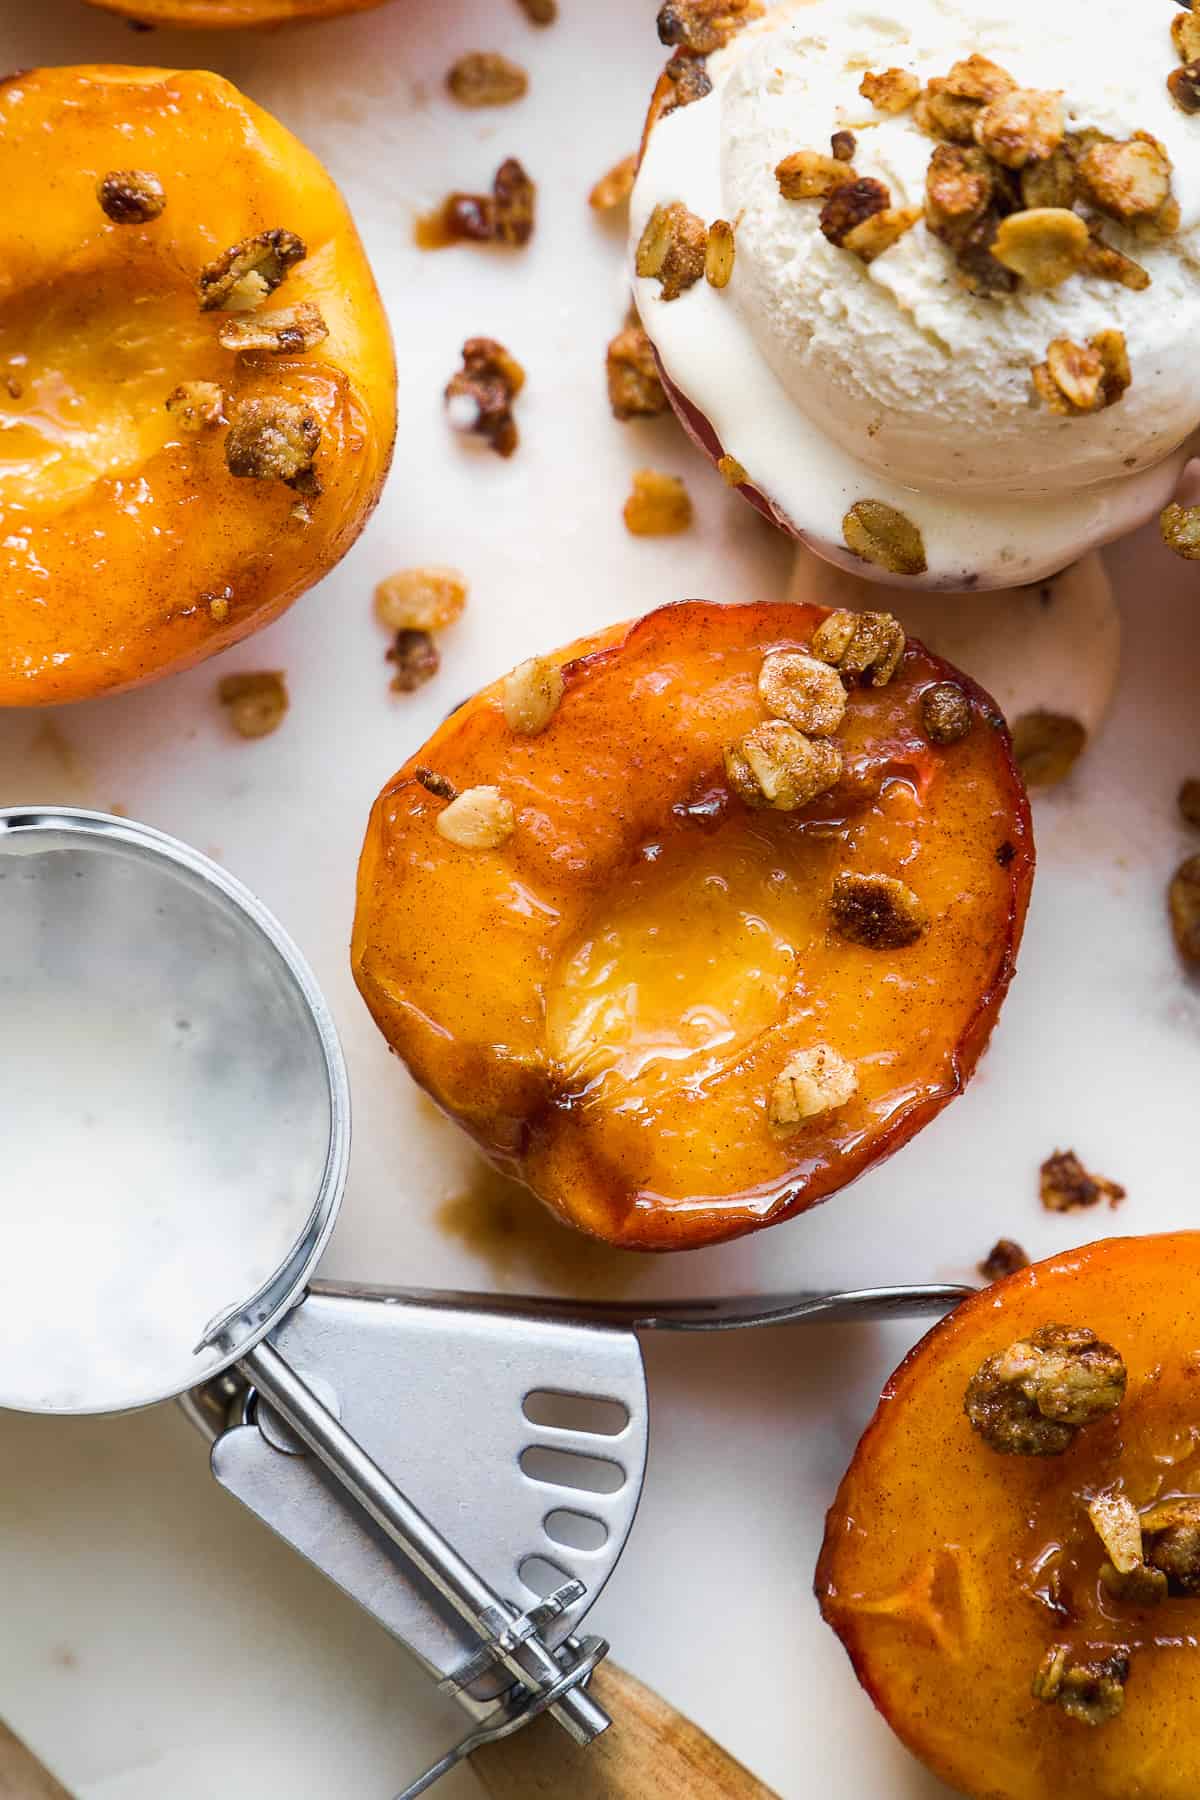 Overhead view of roasted peaches with oat crumble and ice cream.